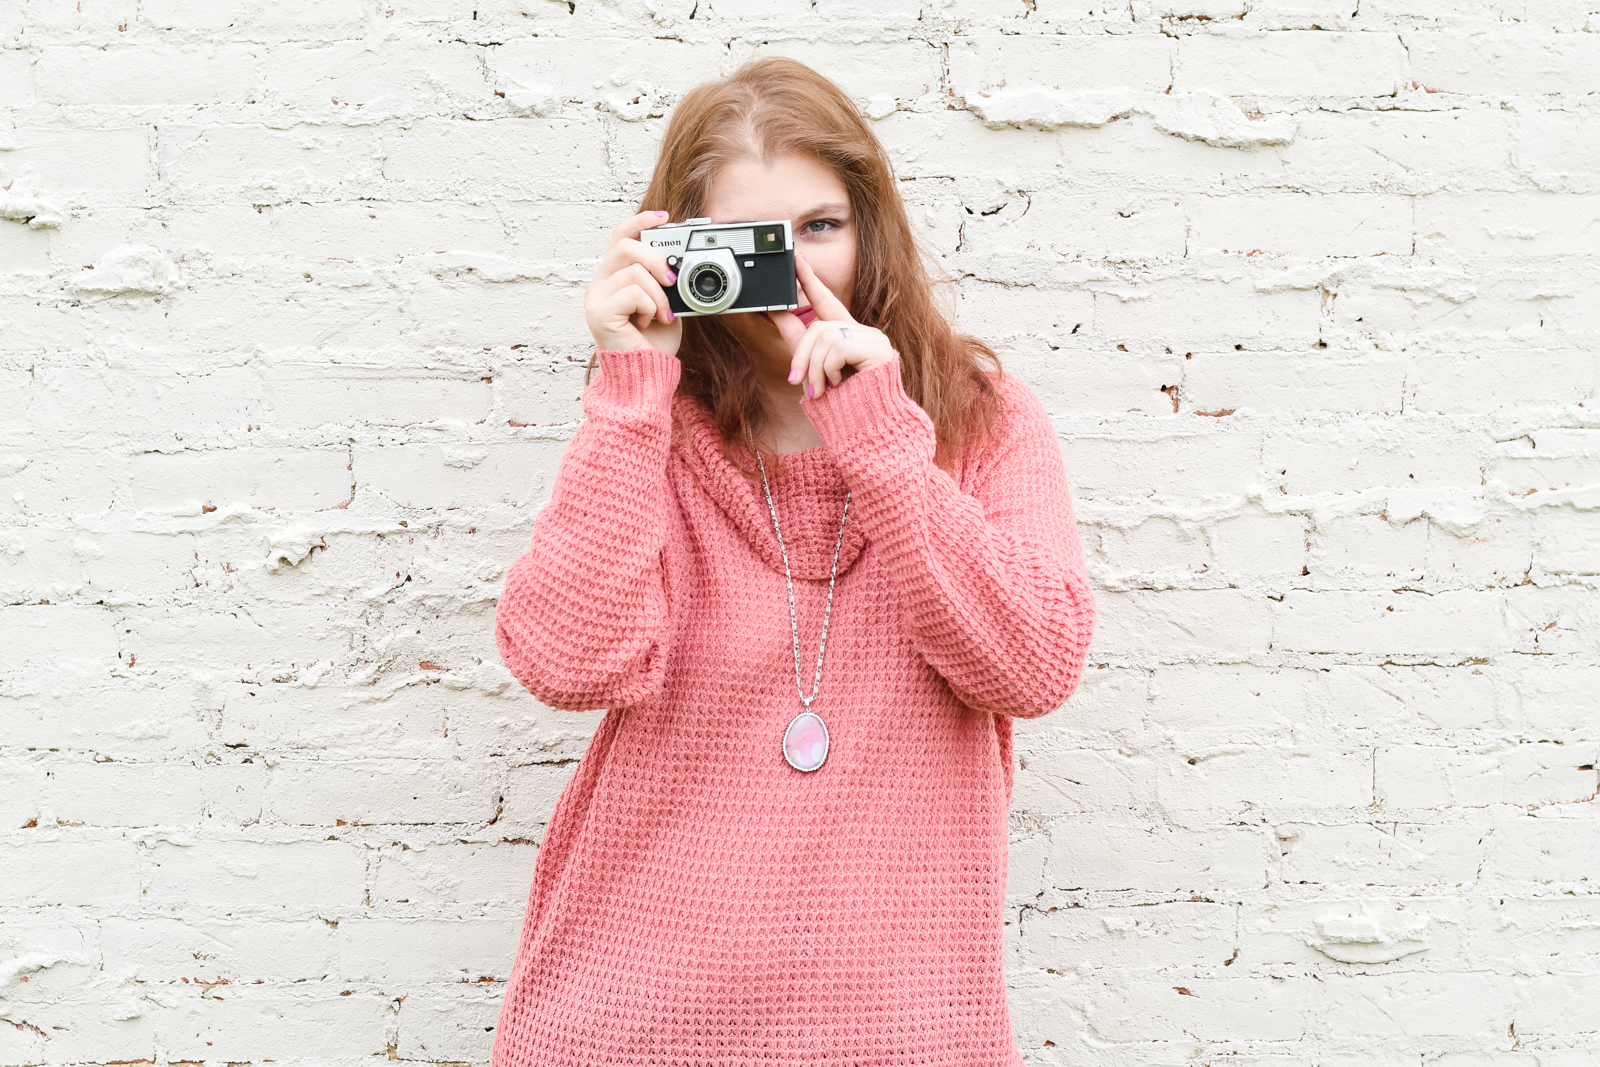 Image of a photographer in a pink sweater standing in front of a white brick wall and holding a camera.